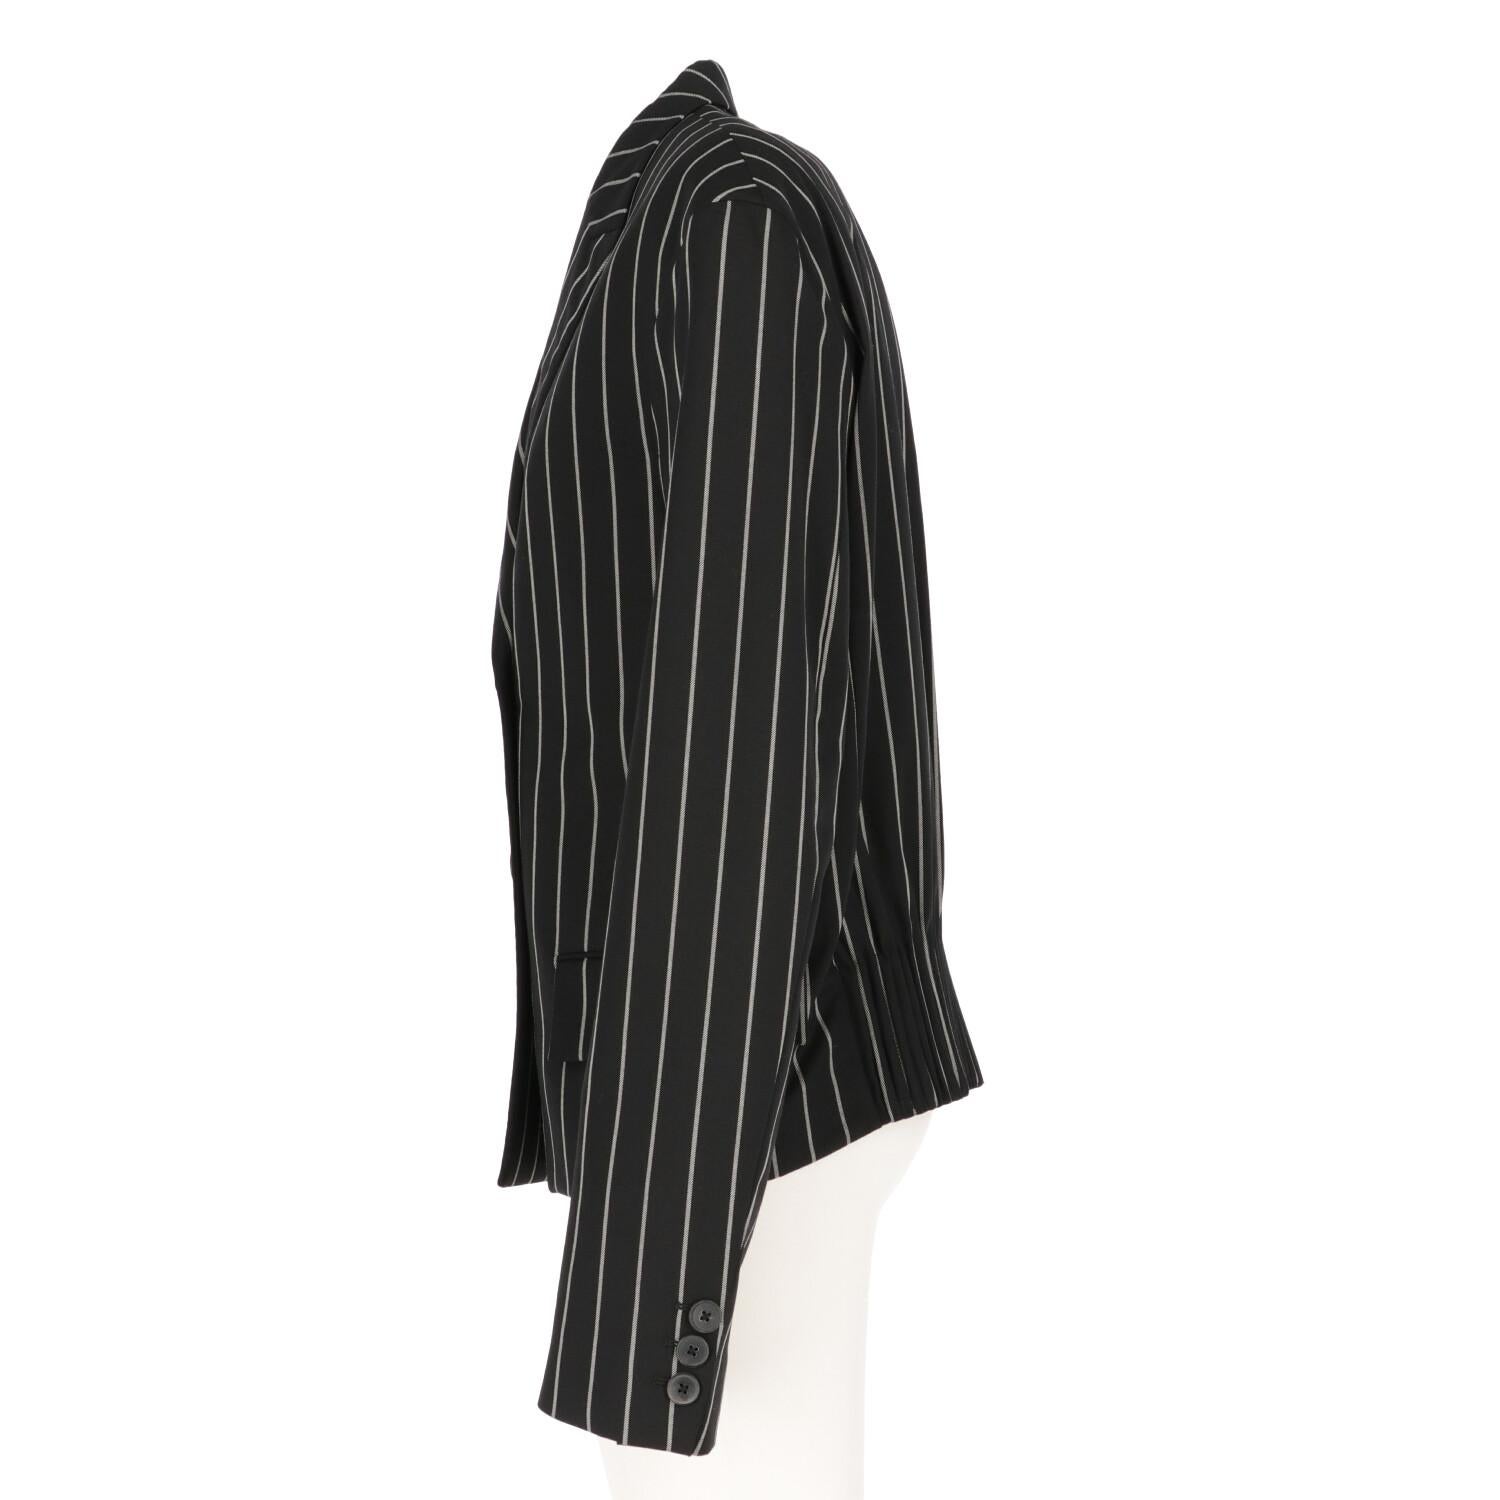 Jil Sander black pinstripe wool blend double-breasted blazer. Classic lapel collar and front buttons. Long sleeves, faux flap pockets and back elastic band.
Years: 2017

Made in Italy

Size: 34 IT

Flat measurements

Height: 67 cm
Bust: 50